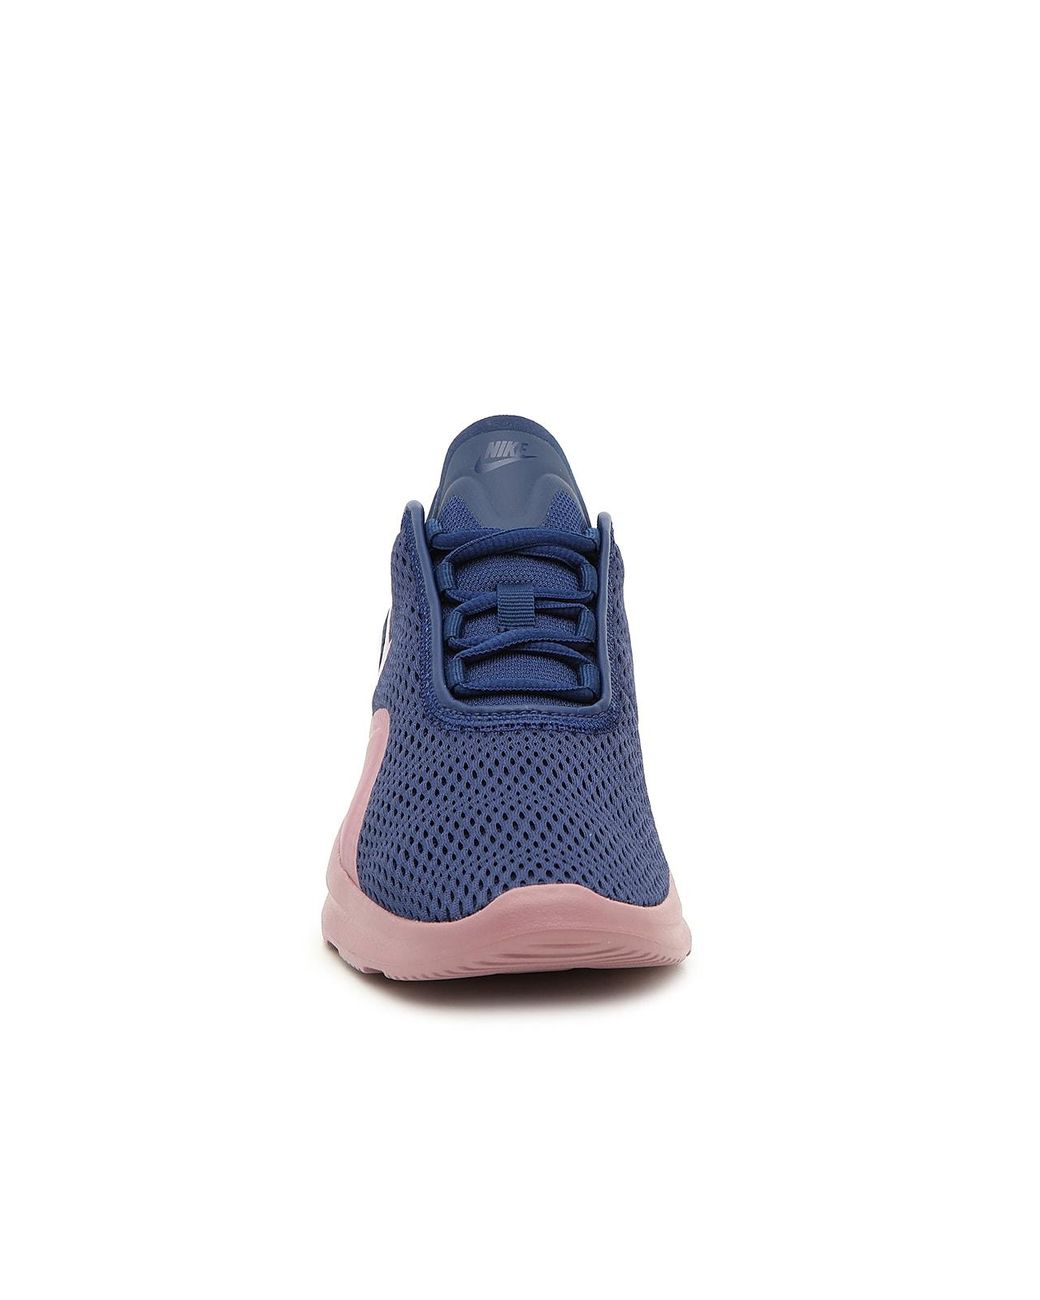 Nike Synthetic Air Max Motion 2 Sneaker in Navy/Mauve (Blue) | Lyst